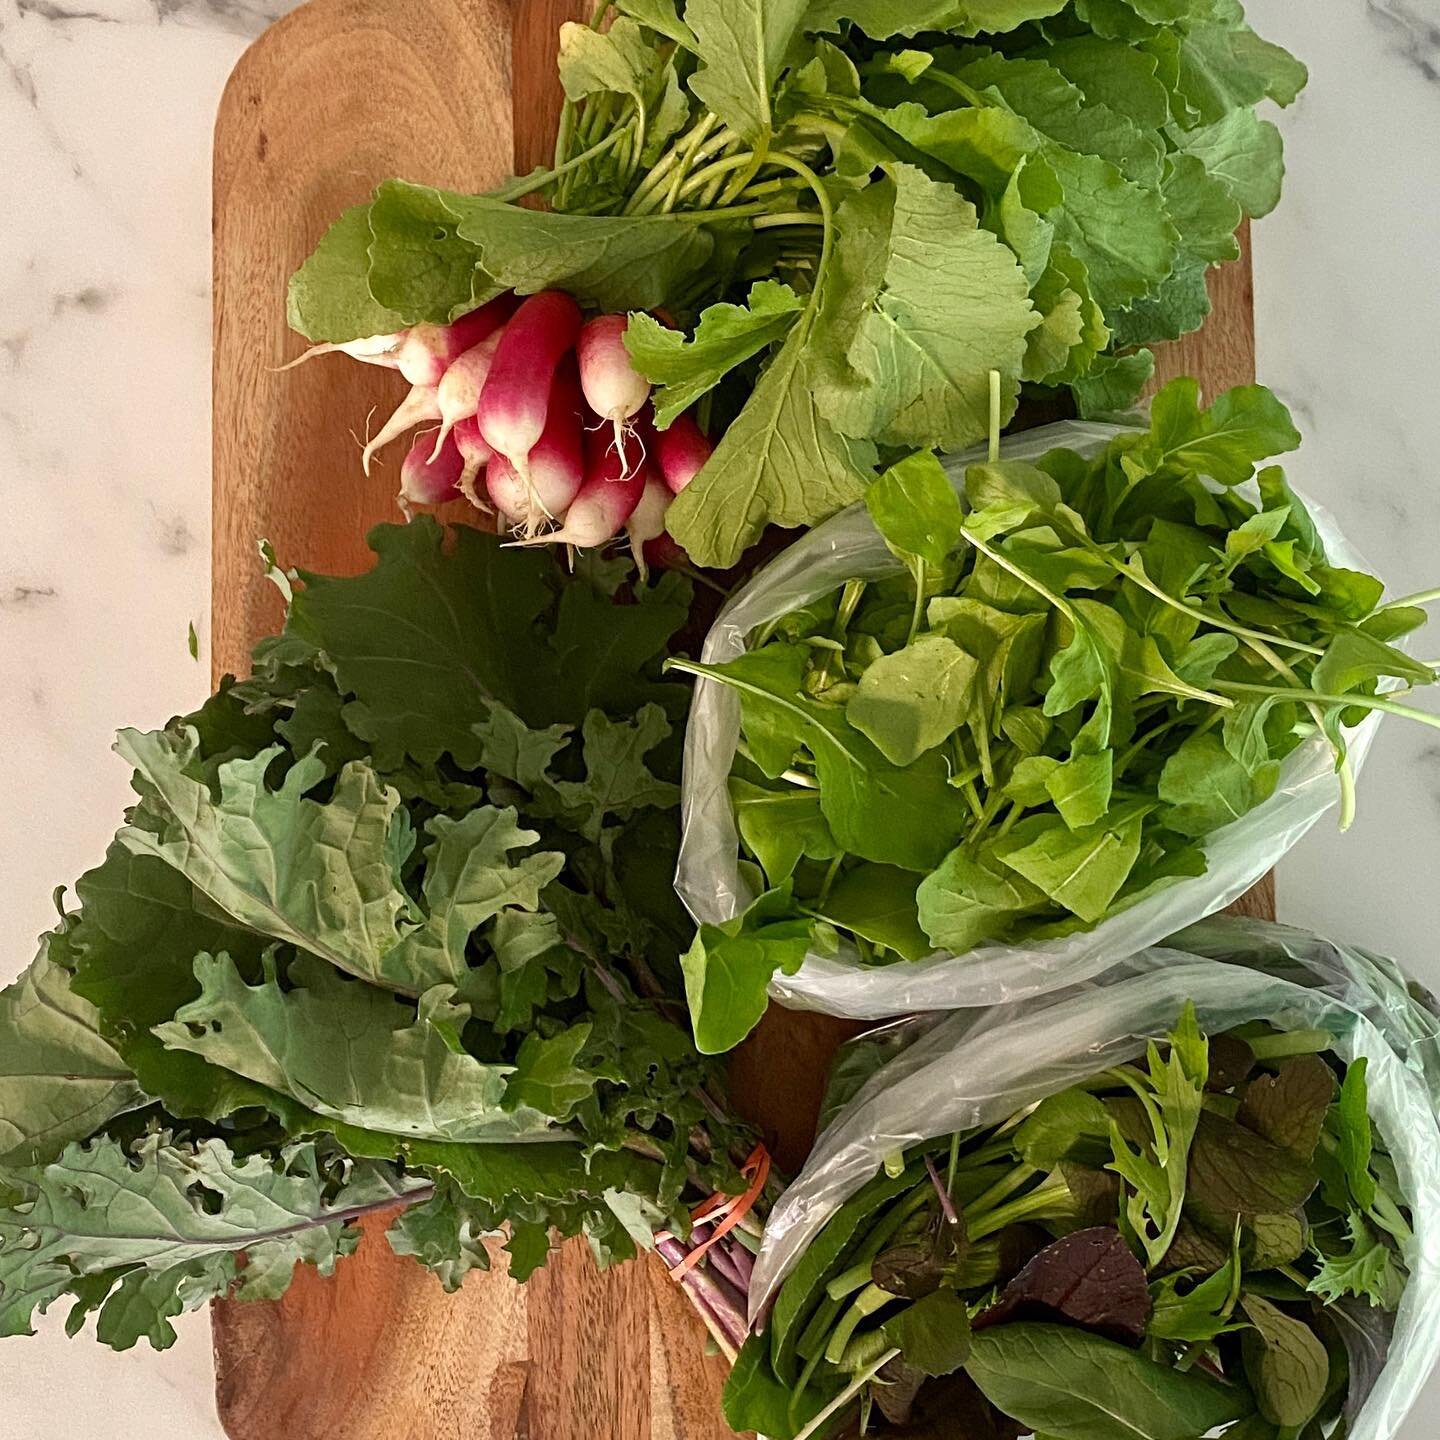 We are thrilled to have picked up our first CSA &ldquo;half share&rdquo; from the Lo Farm today. Can&rsquo;t wait to start cooking - Arugula, Baby Asian Greens, French Breakfast Radish,
Red Russian Kale! #cometocatskill #organicfarming #csamembers